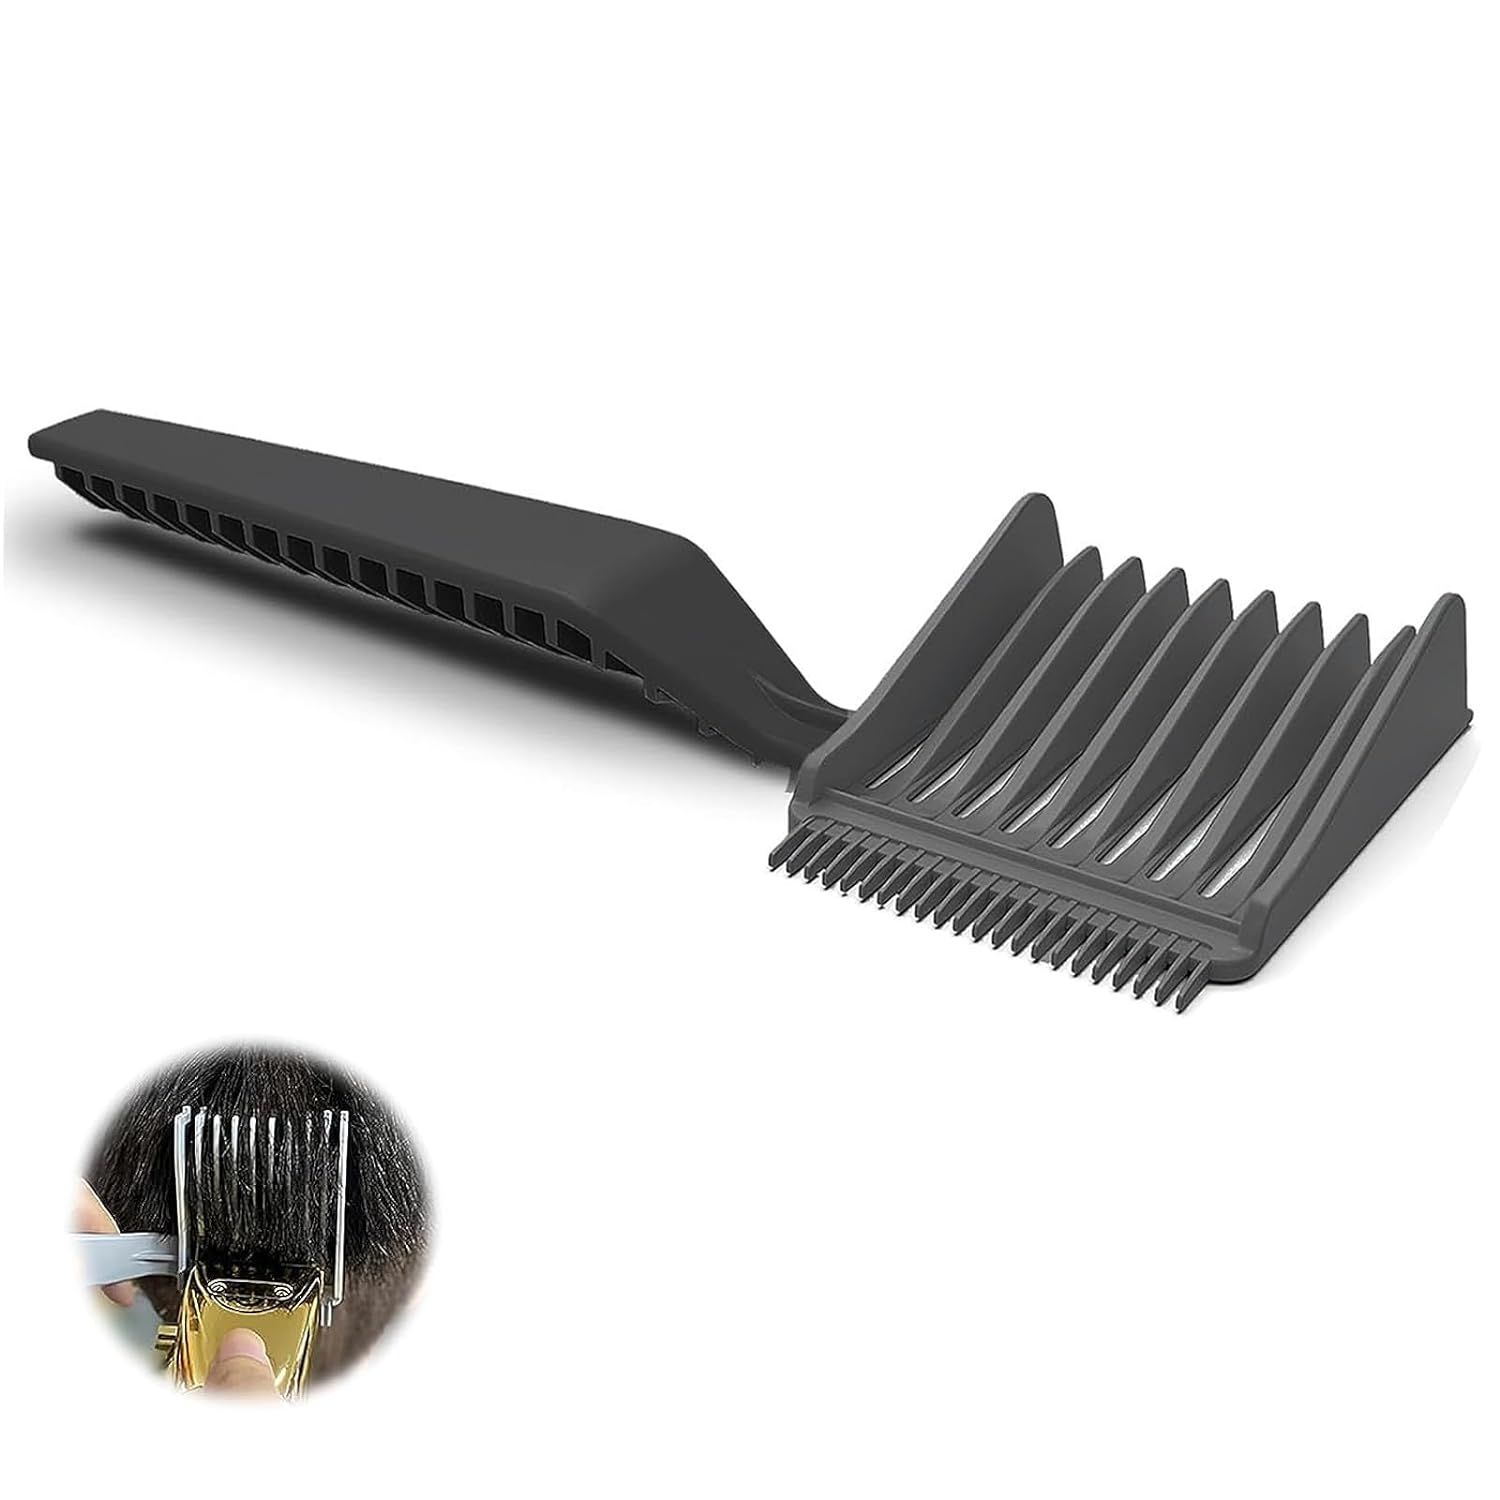 Barber Comb for Men, Barber Fade Combs, Professional Curved Positioning Comb, Specially Designed for Men\'s Hairstyle, Beard Styling, and Developed Sideburns (Black)